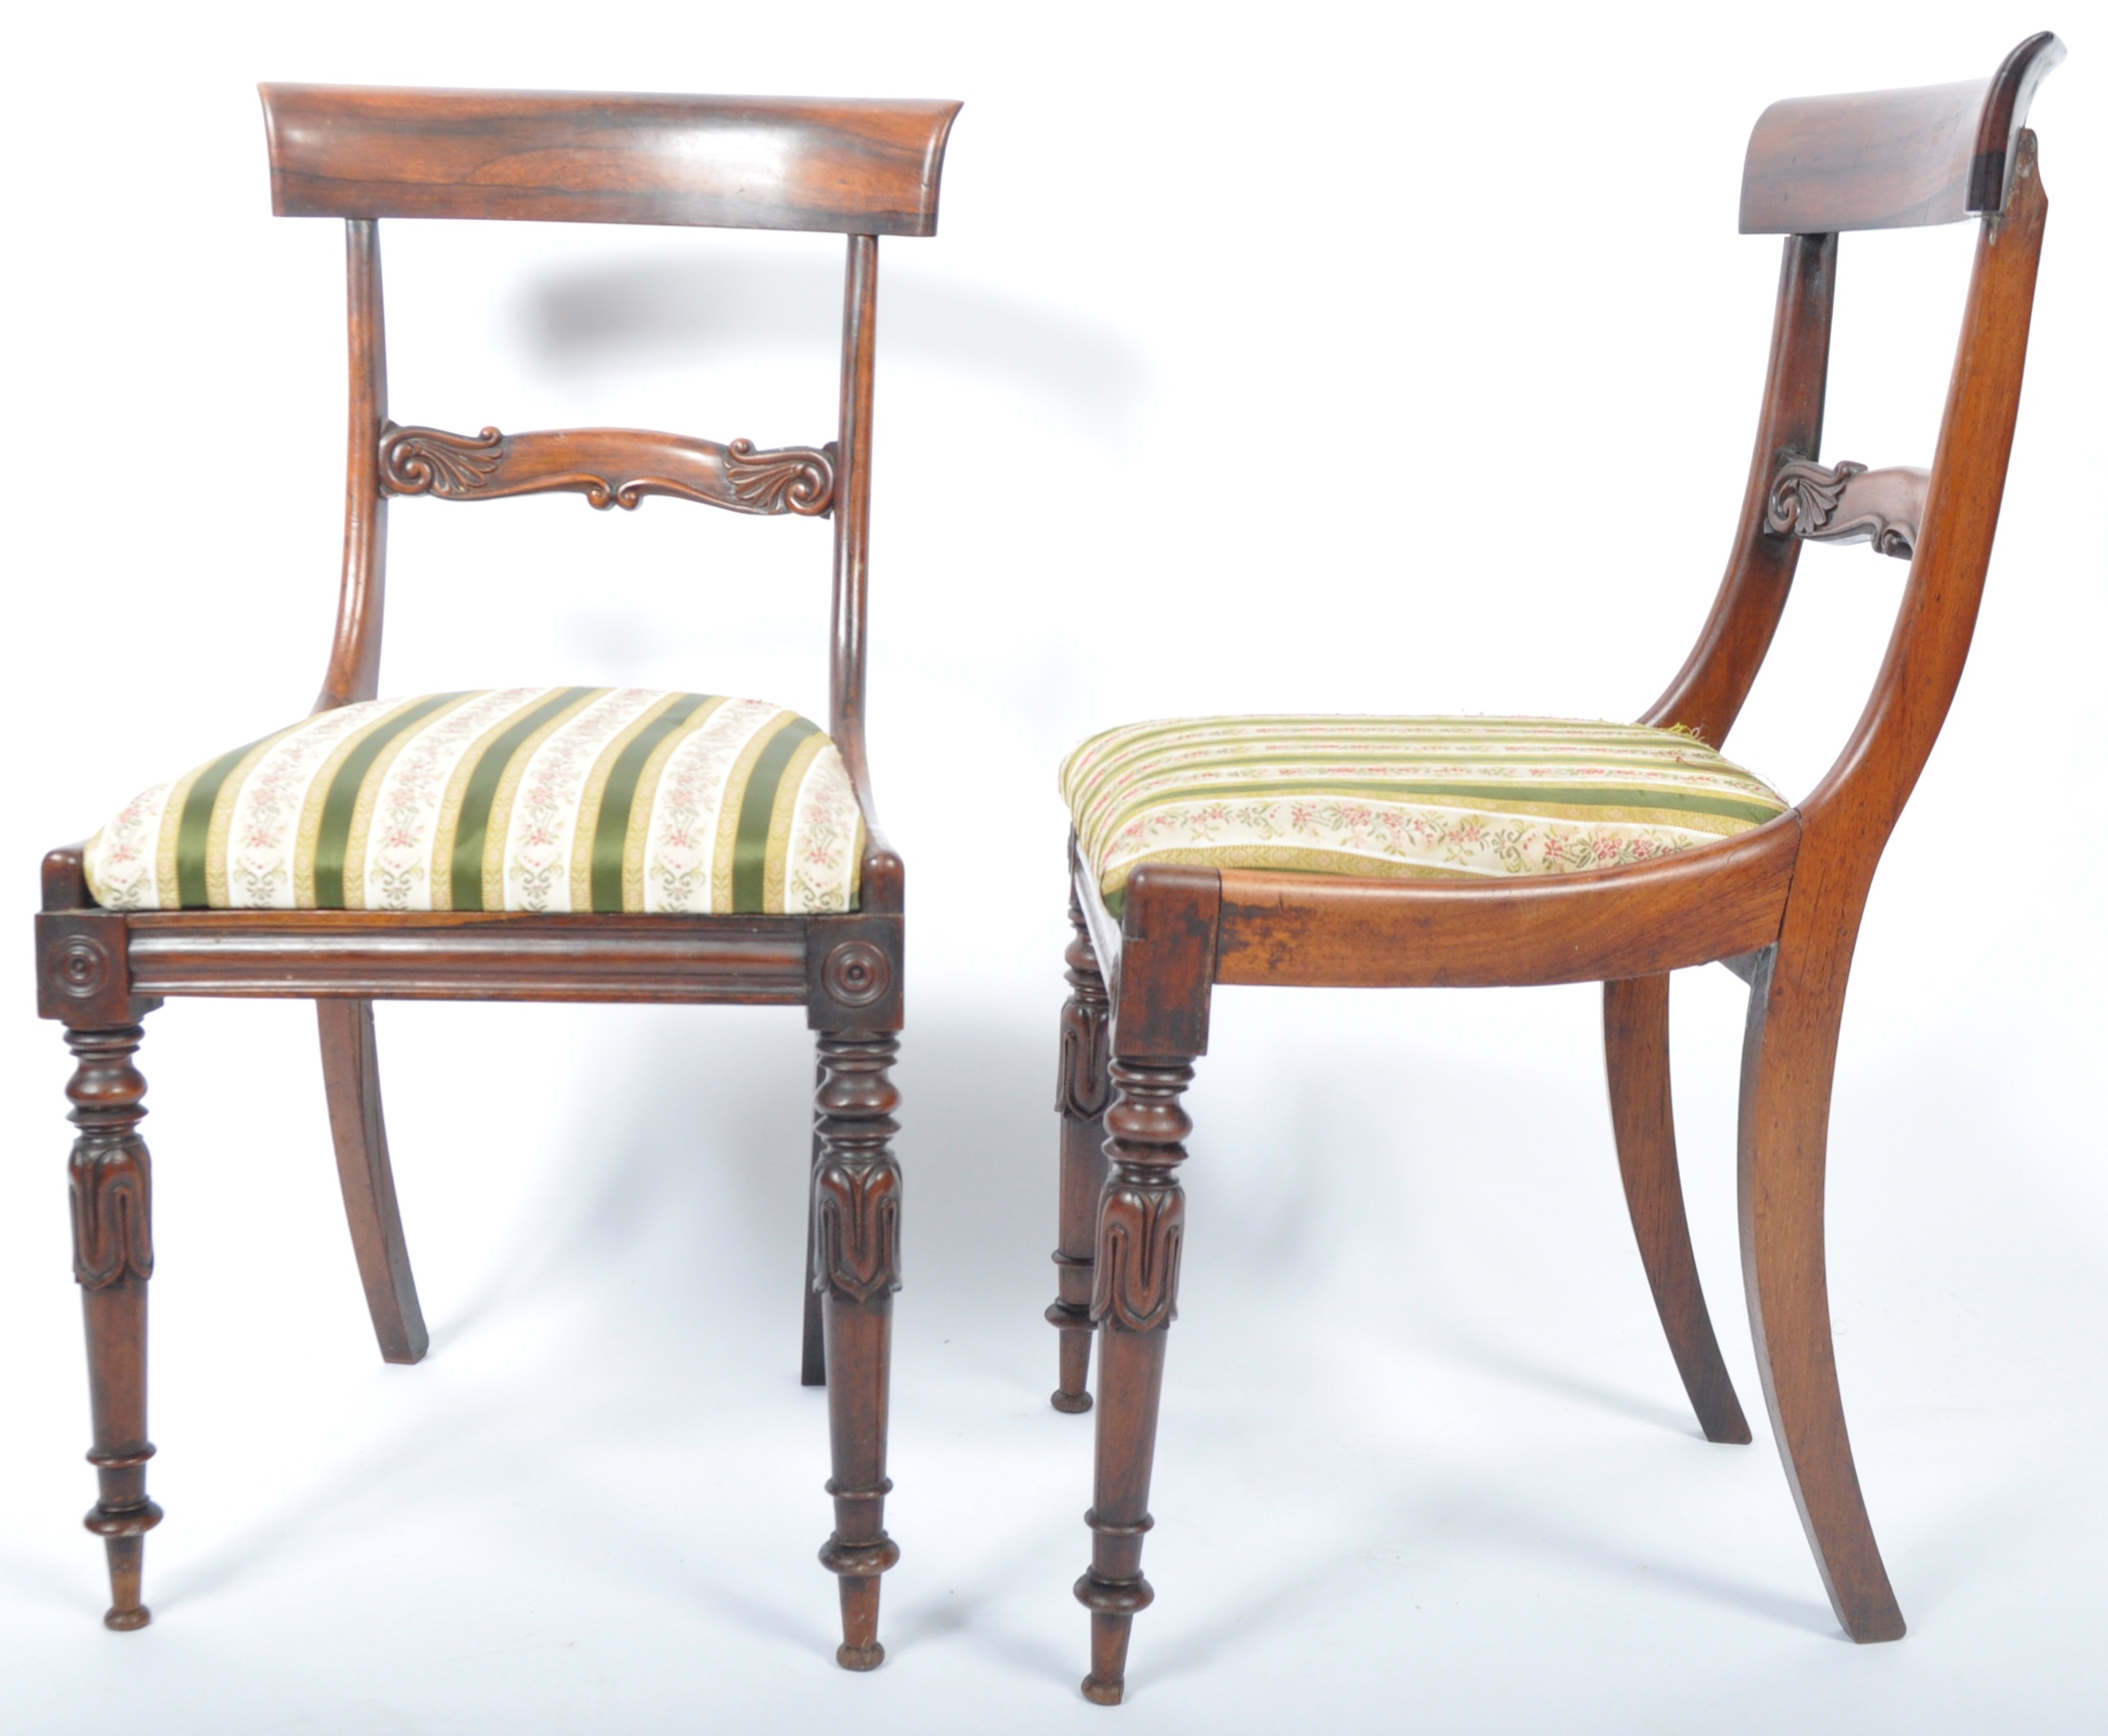 SIX 19TH CENTURY ROSEWOOD DINING CHAIRS IN THE GILLOWS MANNER - Image 9 of 11